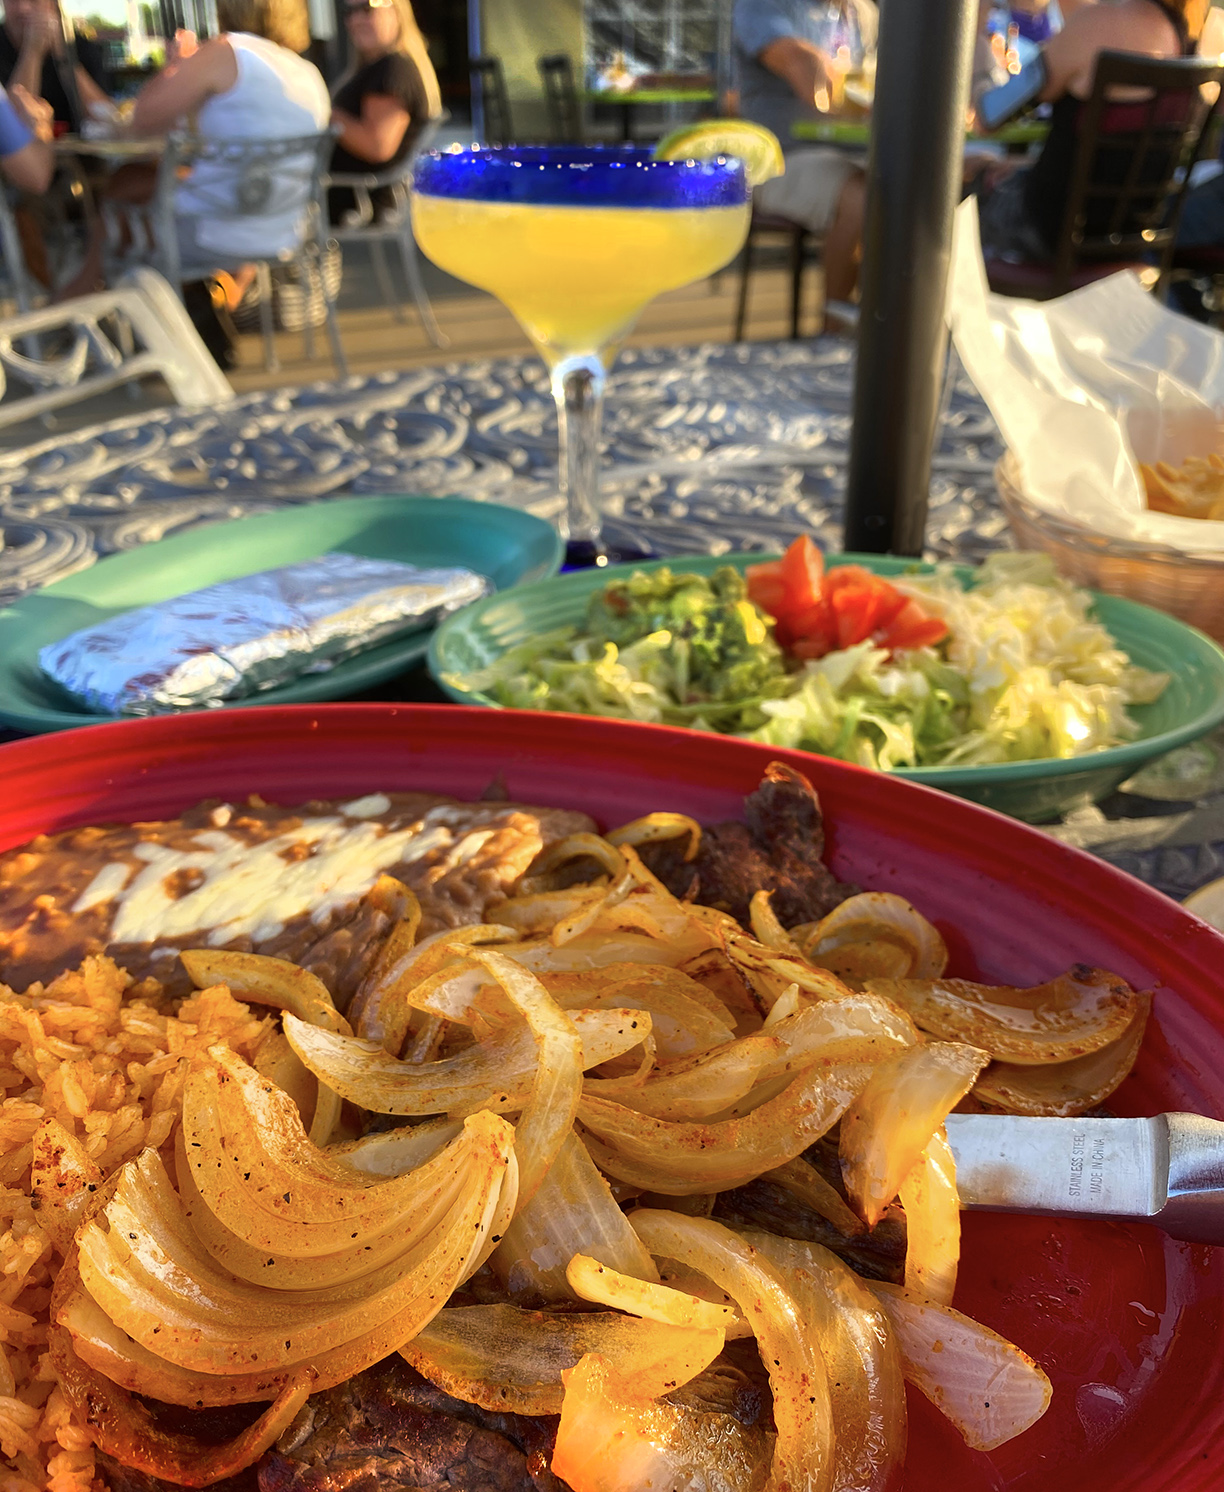 Delicious meal on our patio